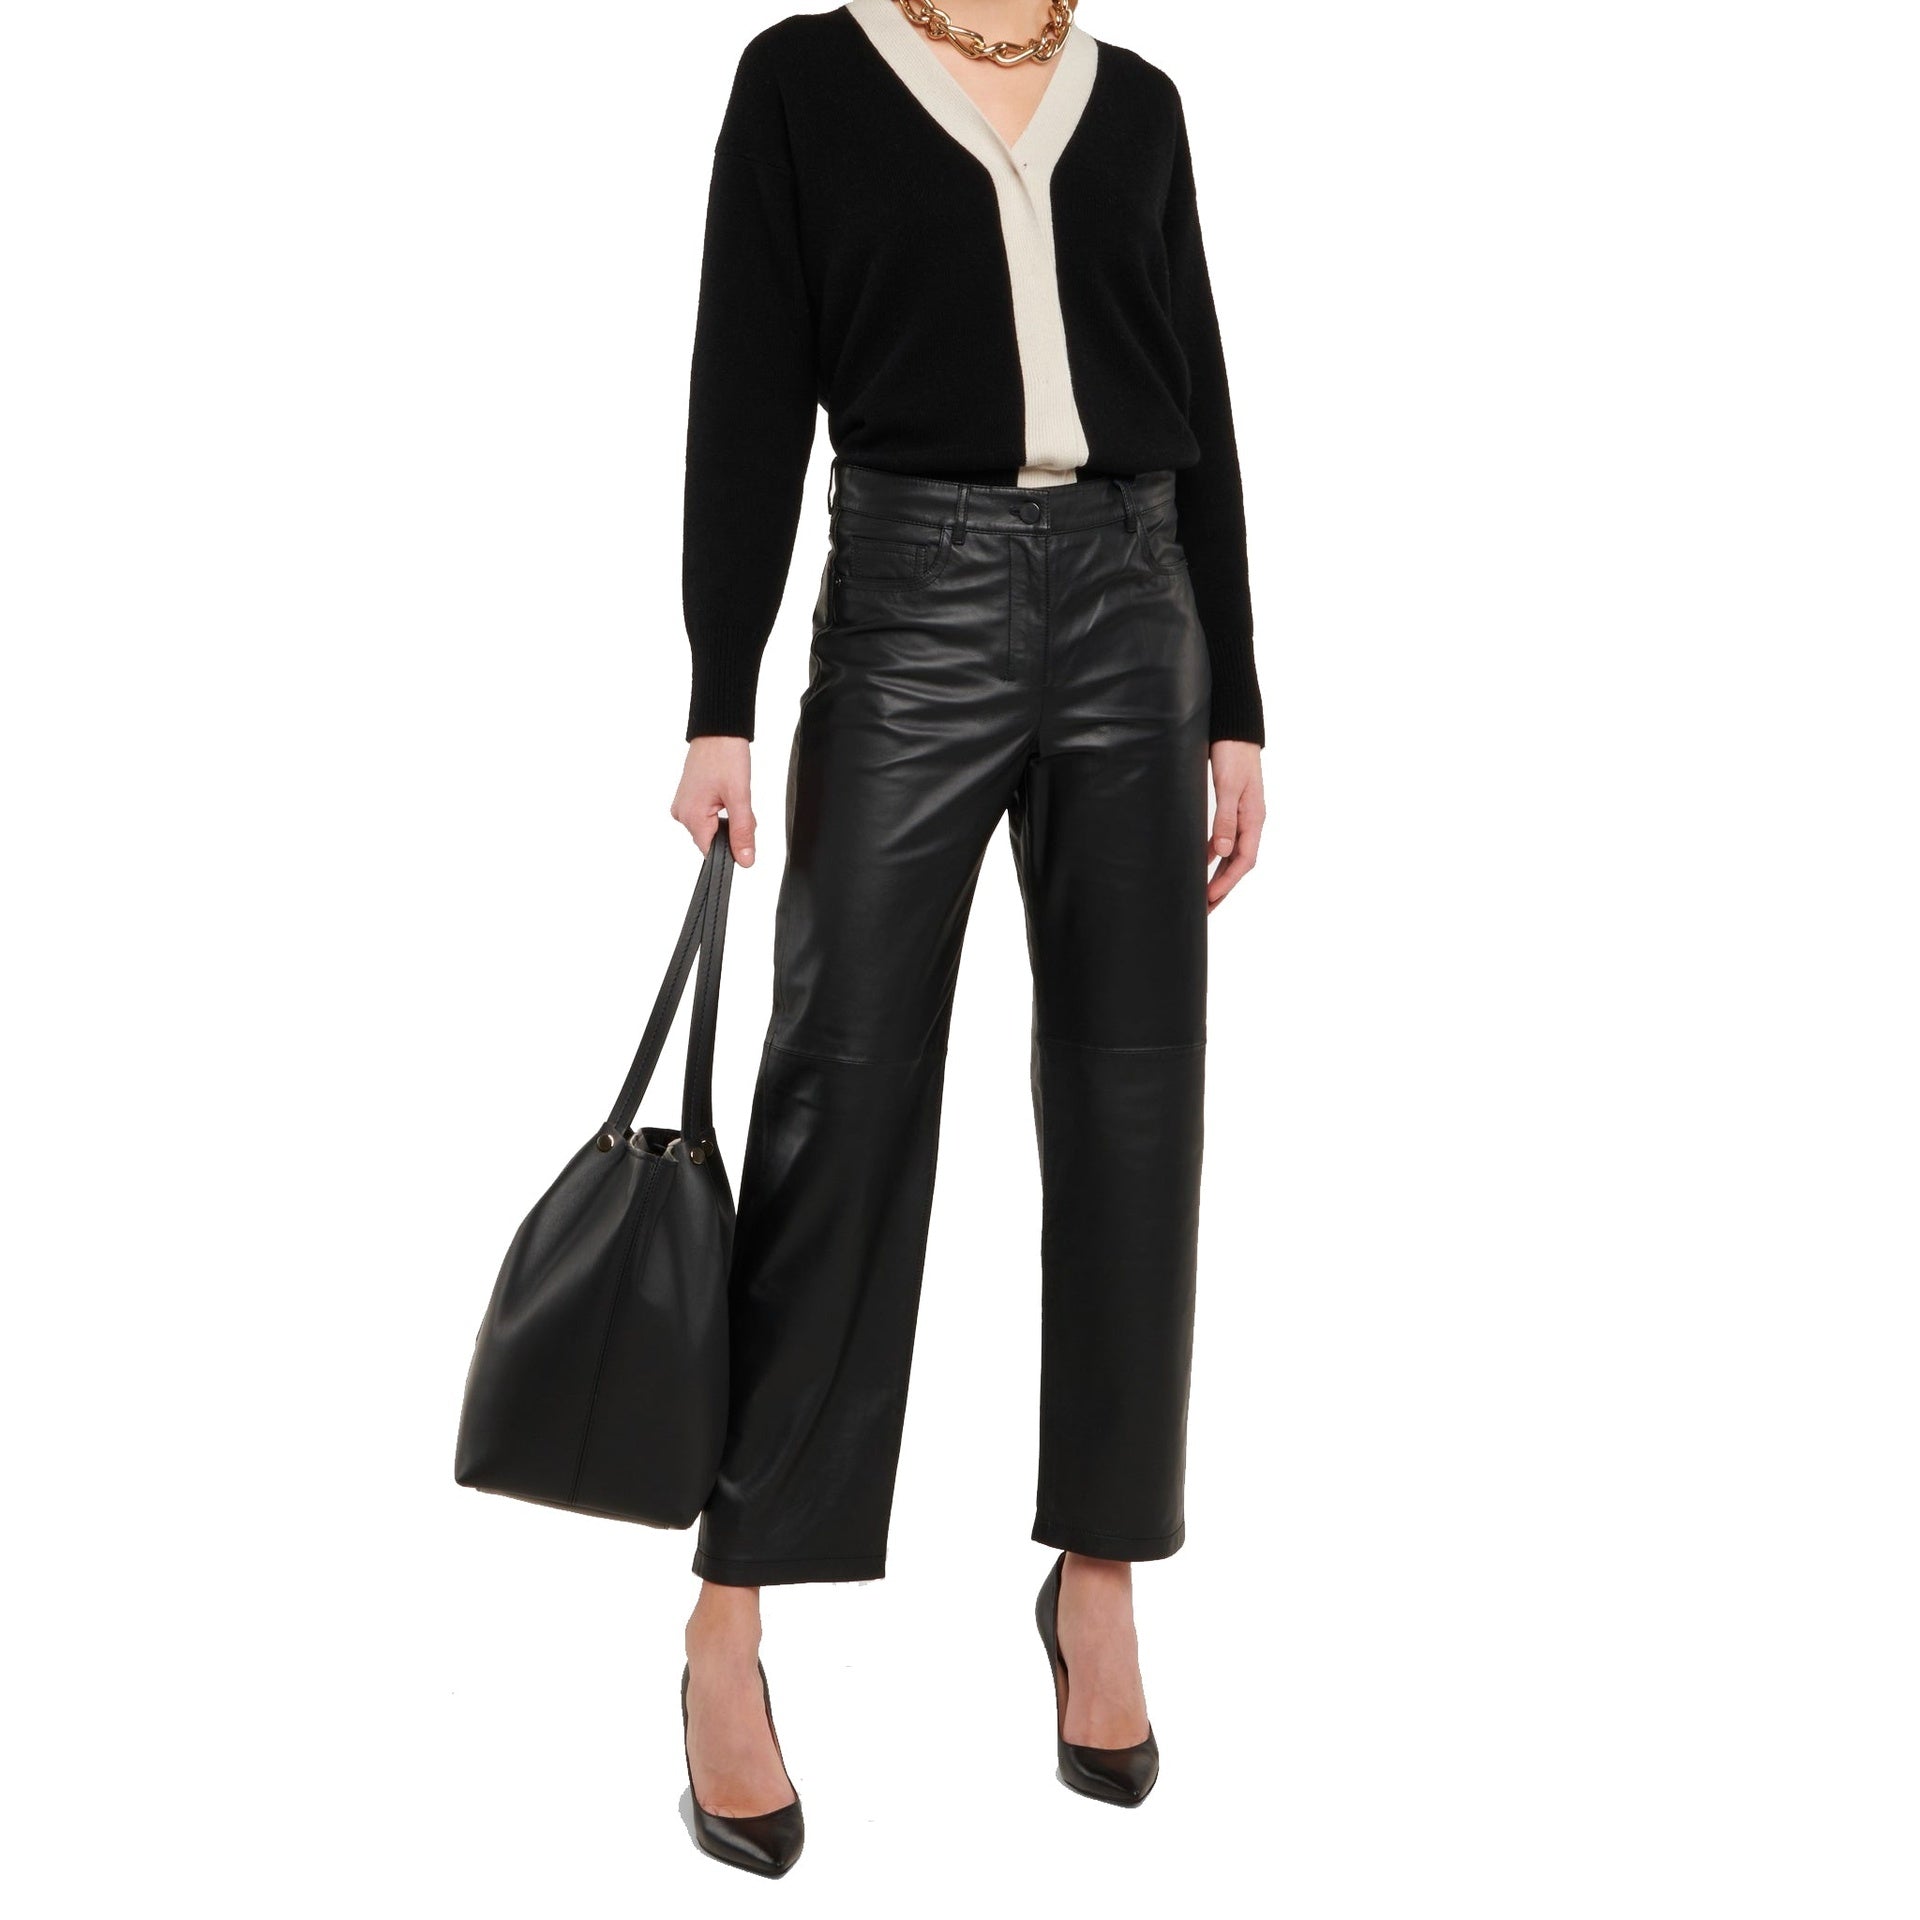 S-MAX-MARA-OUTLET-SALE-s-Max-Mara-Liana-Leather-Pants-Hosen-ARCHIVE-COLLECTION-2.jpg